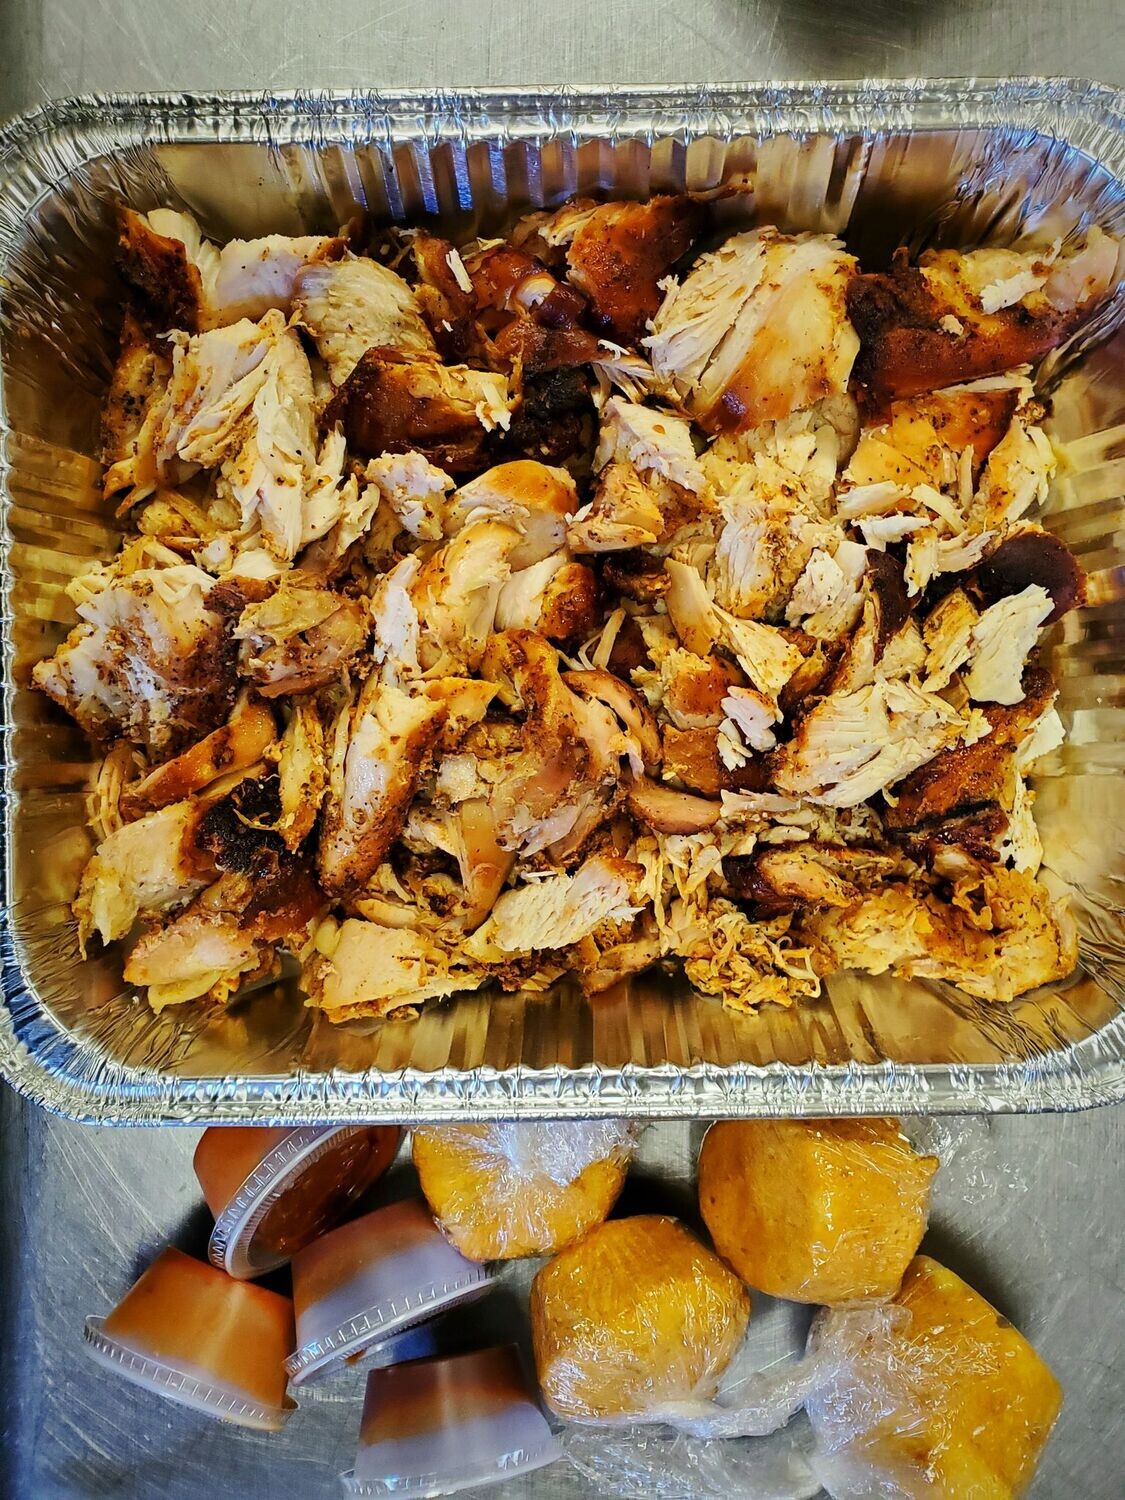 PARTY TRAY - SMOKED PULLED PORK